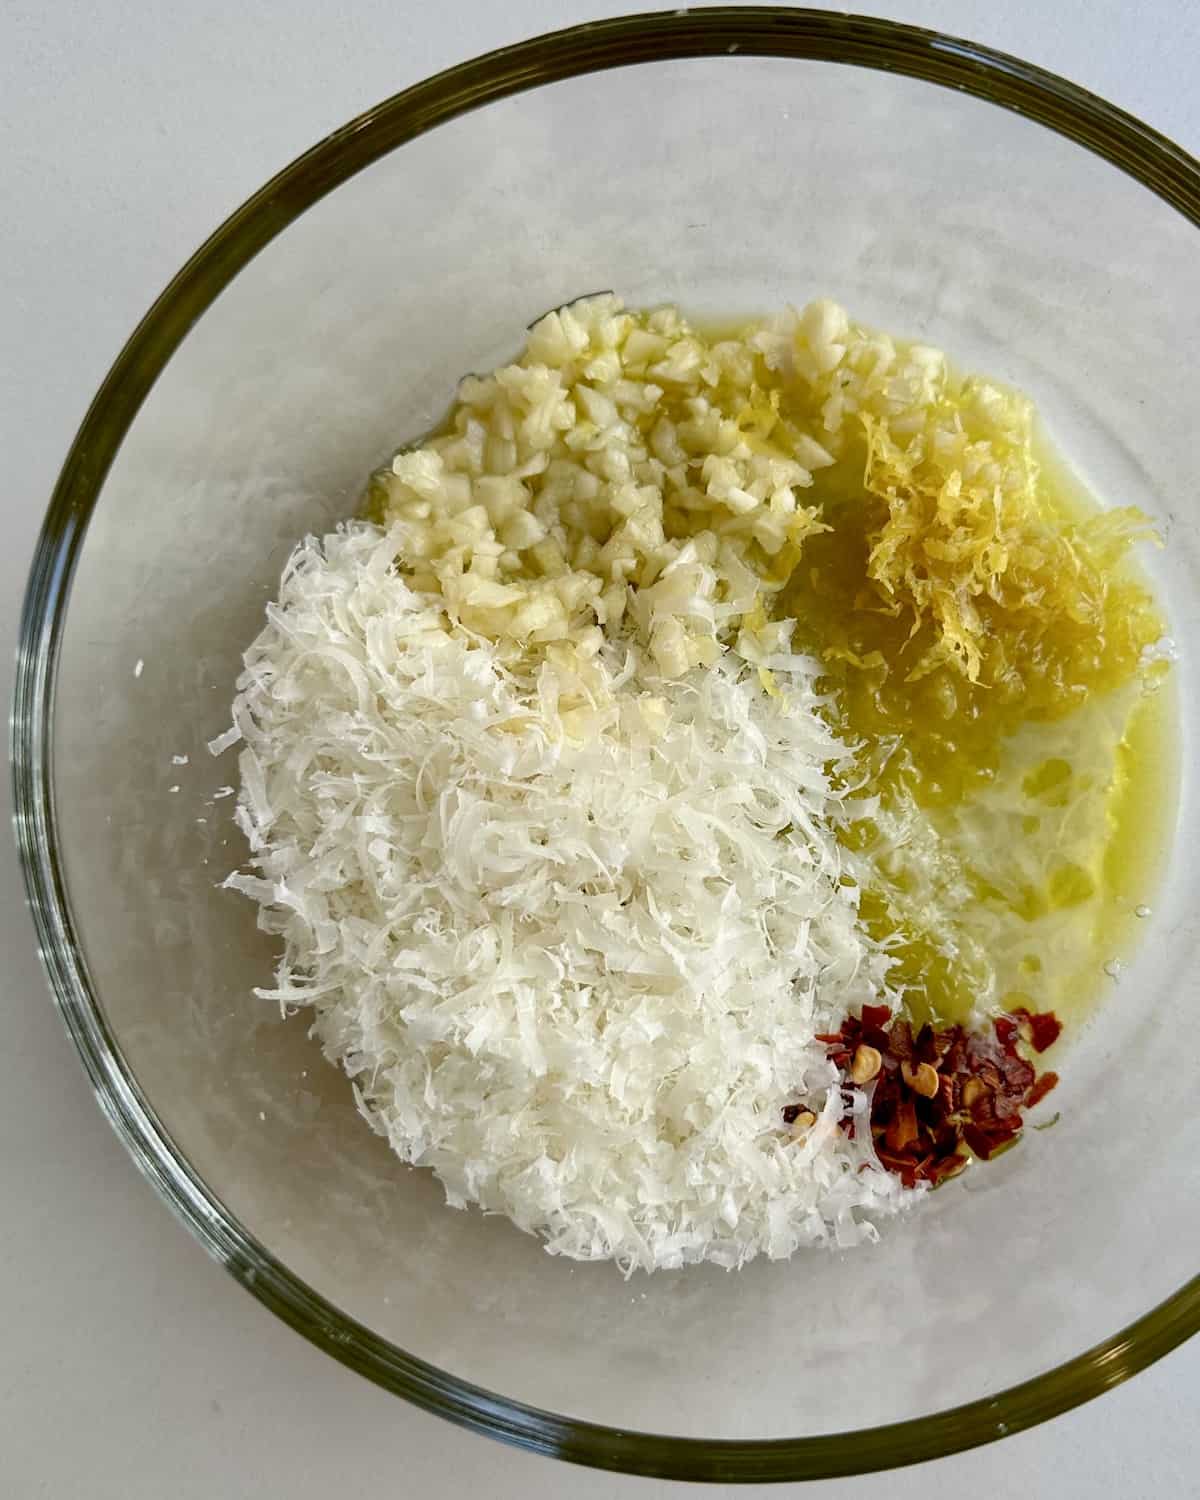 live oil, minced garlic, red pepper flakes, lemon zest and juice and grated parmesan in a clear bowl.